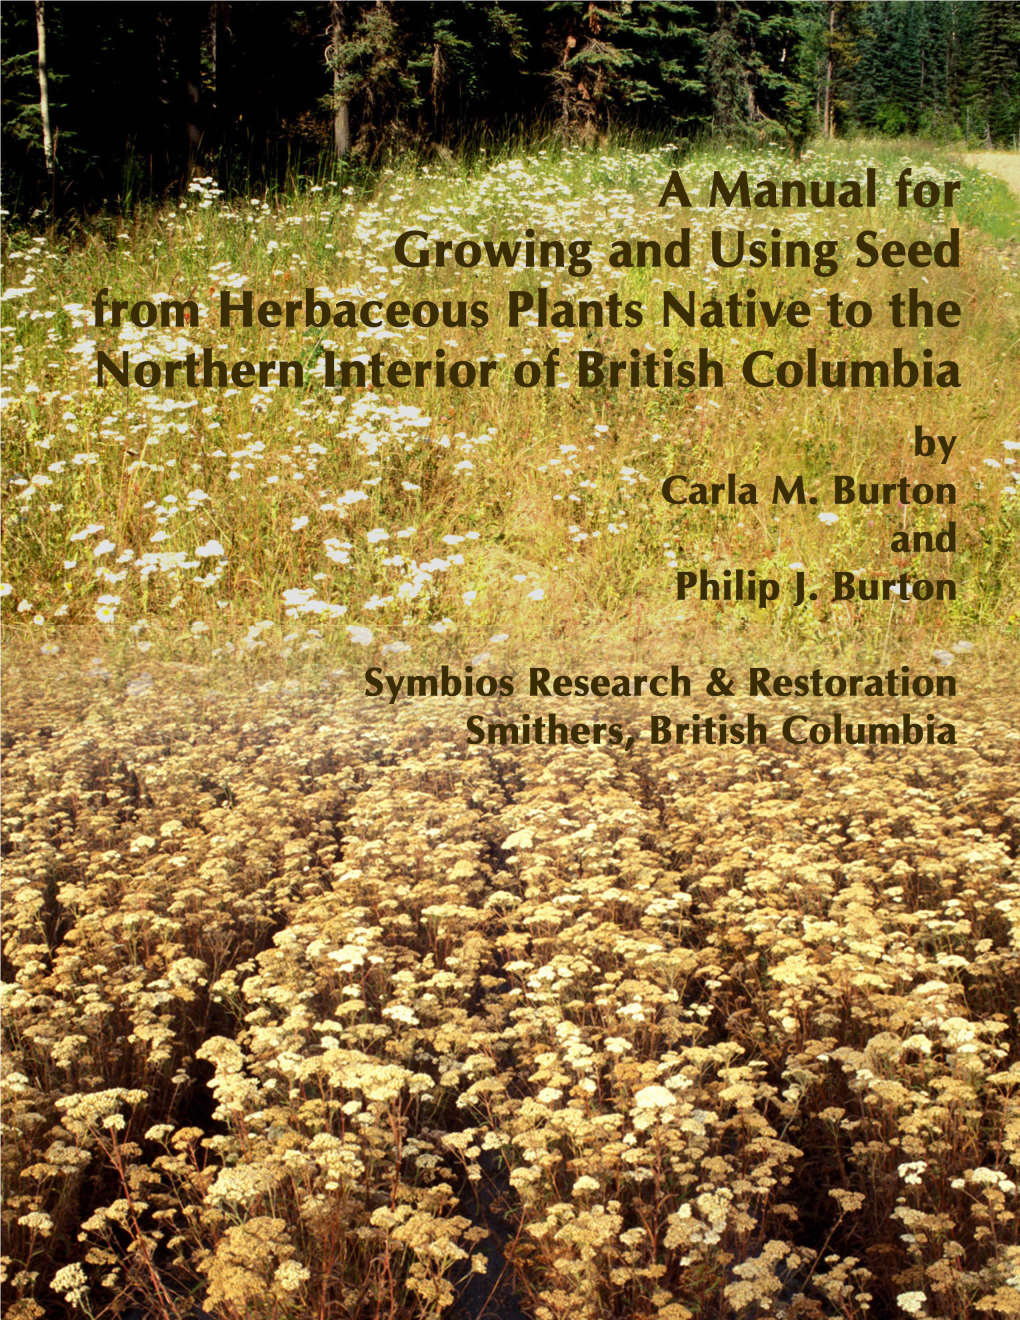 A Manual for Growing and Using Seed from Herbaceous Plants Native to the Interior of Northern British Columbia